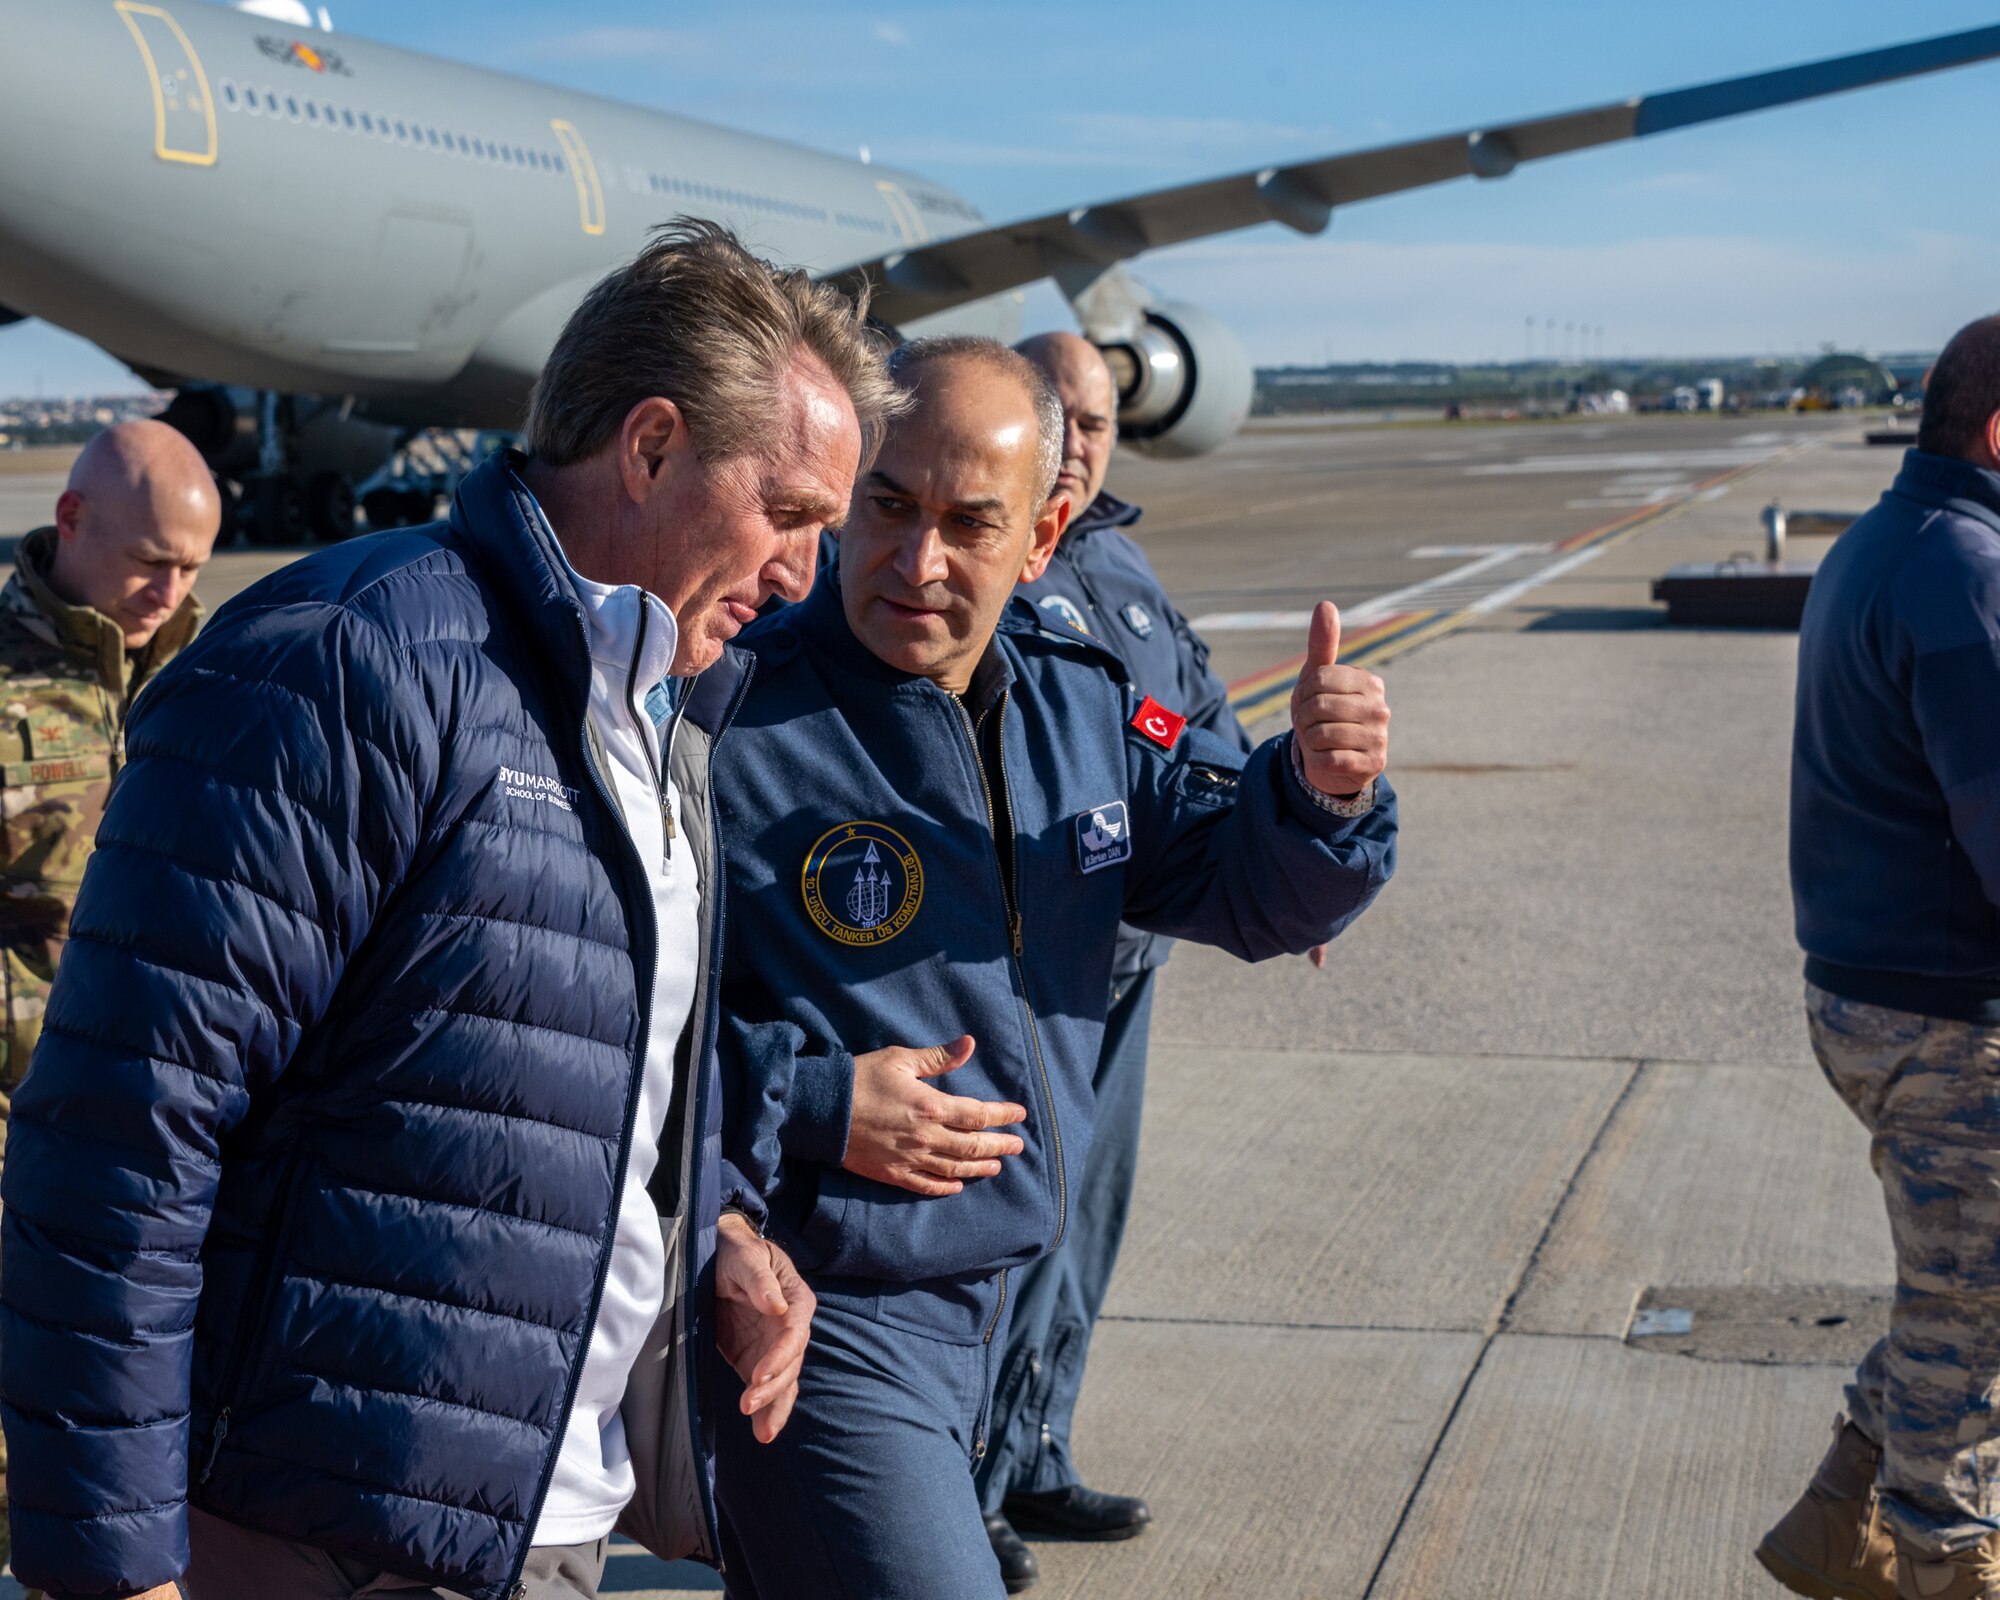 U.S. Ambassador Jeffry Flake, U.S. Ambassador to Türkiye, left, walks with Brig. Gen. Mehmet Serkan Dan, 10th Tanker Base Command commander, right, after his arrival at Incirlik Air Base, Türkiye, Feb 8, 2023. Ambassador Flake visited Incirlik AB to greet members of the United States Agency for International Development’s Disaster Assistance Response Team, following a series of earthquakes that struck central-southern Türkiye on Feb 6, 2023.  As Ambassador to Türkiye, Flake holds the highest civilian position as The Chief of Mission, and impacts the communication and resources of U.S. personnel, advancing the U.S. foreign policy goals. As a fellow NATO ally, the U.S. Government mobilized personnel to assist in Türkiye in their response efforts. (U.S. Air Force photo by Senior Airman David D. McLoney)